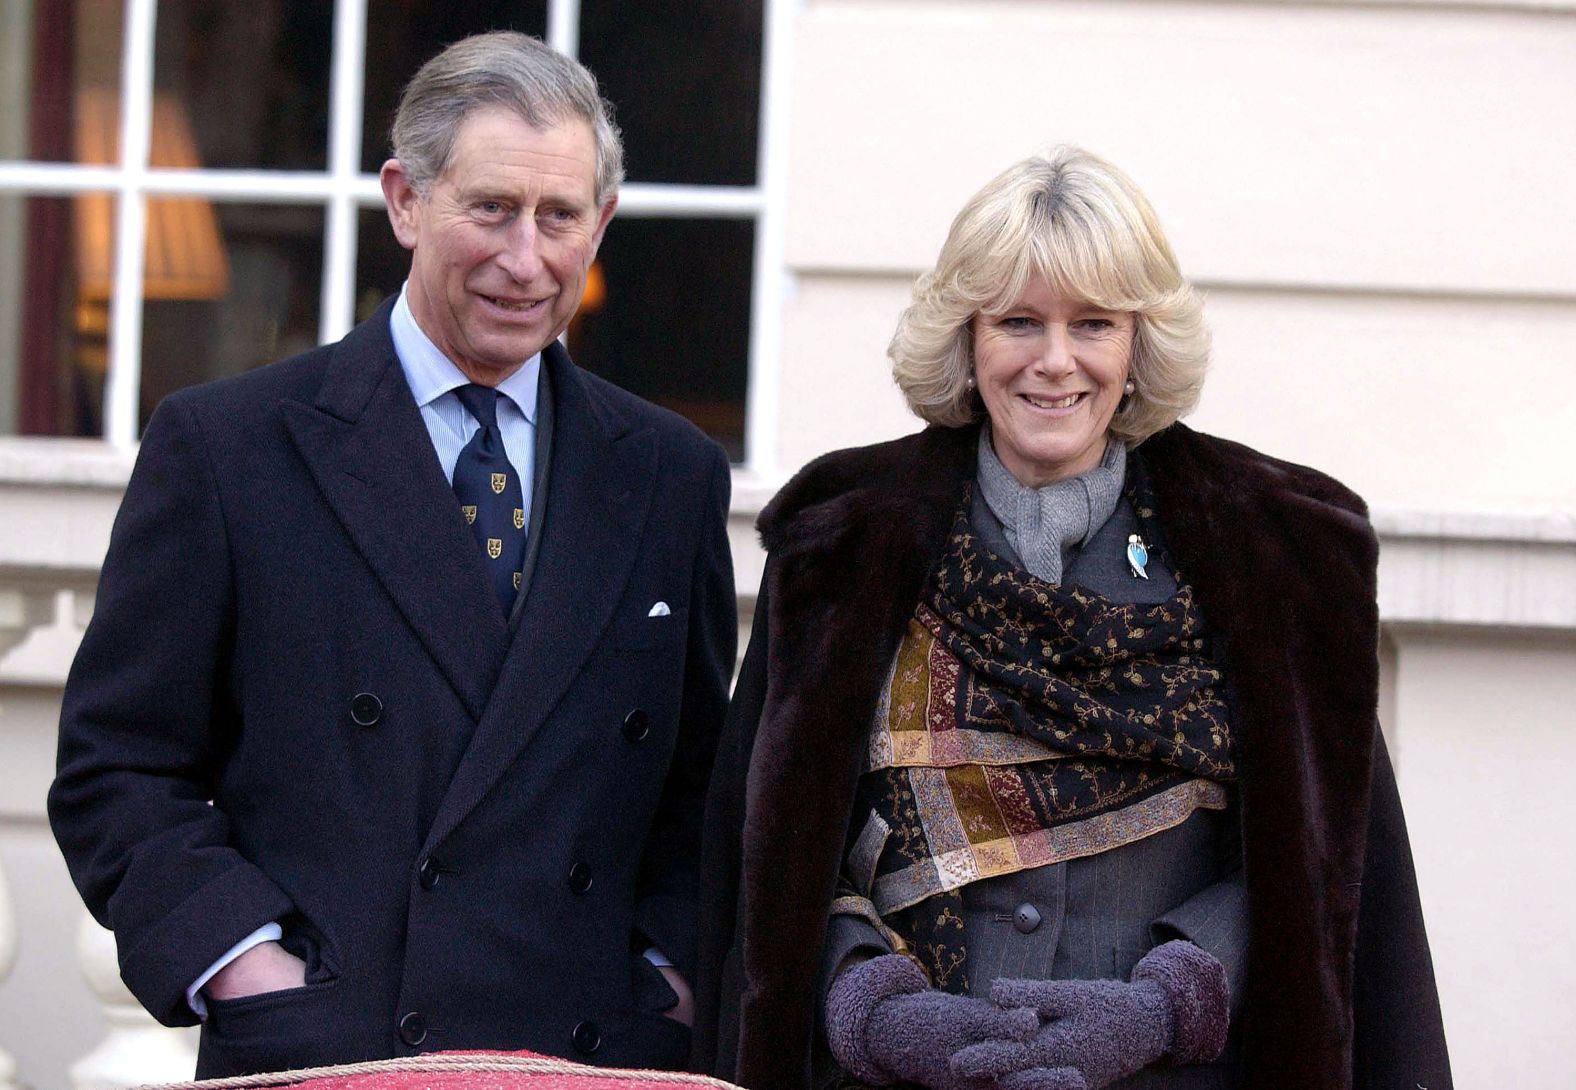 In pictures: Charles and Camilla | CNN